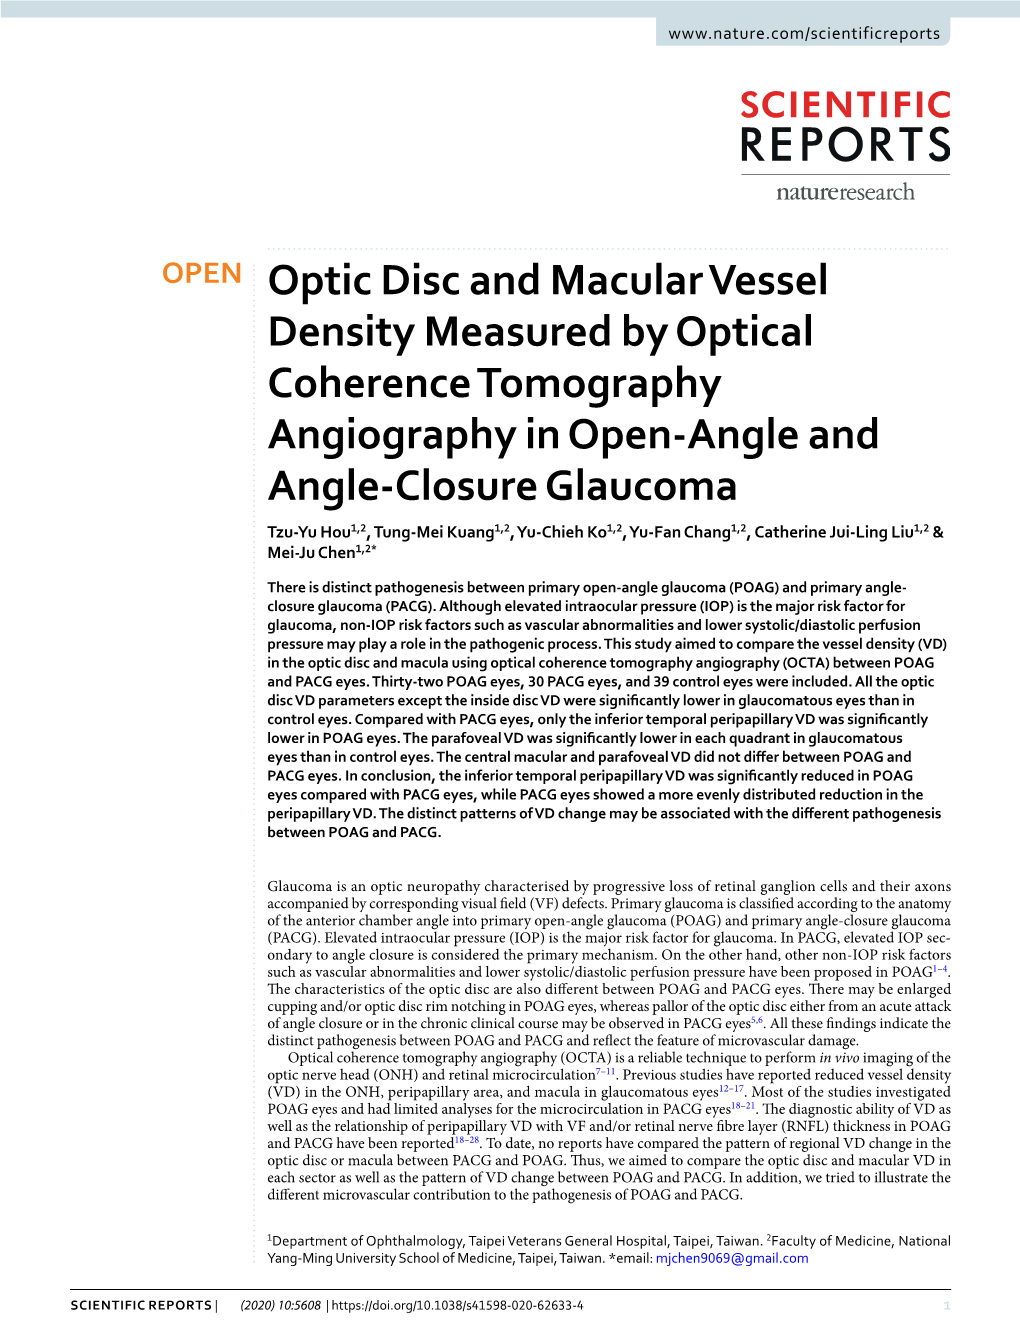 Optic Disc and Macular Vessel Density Measured by Optical